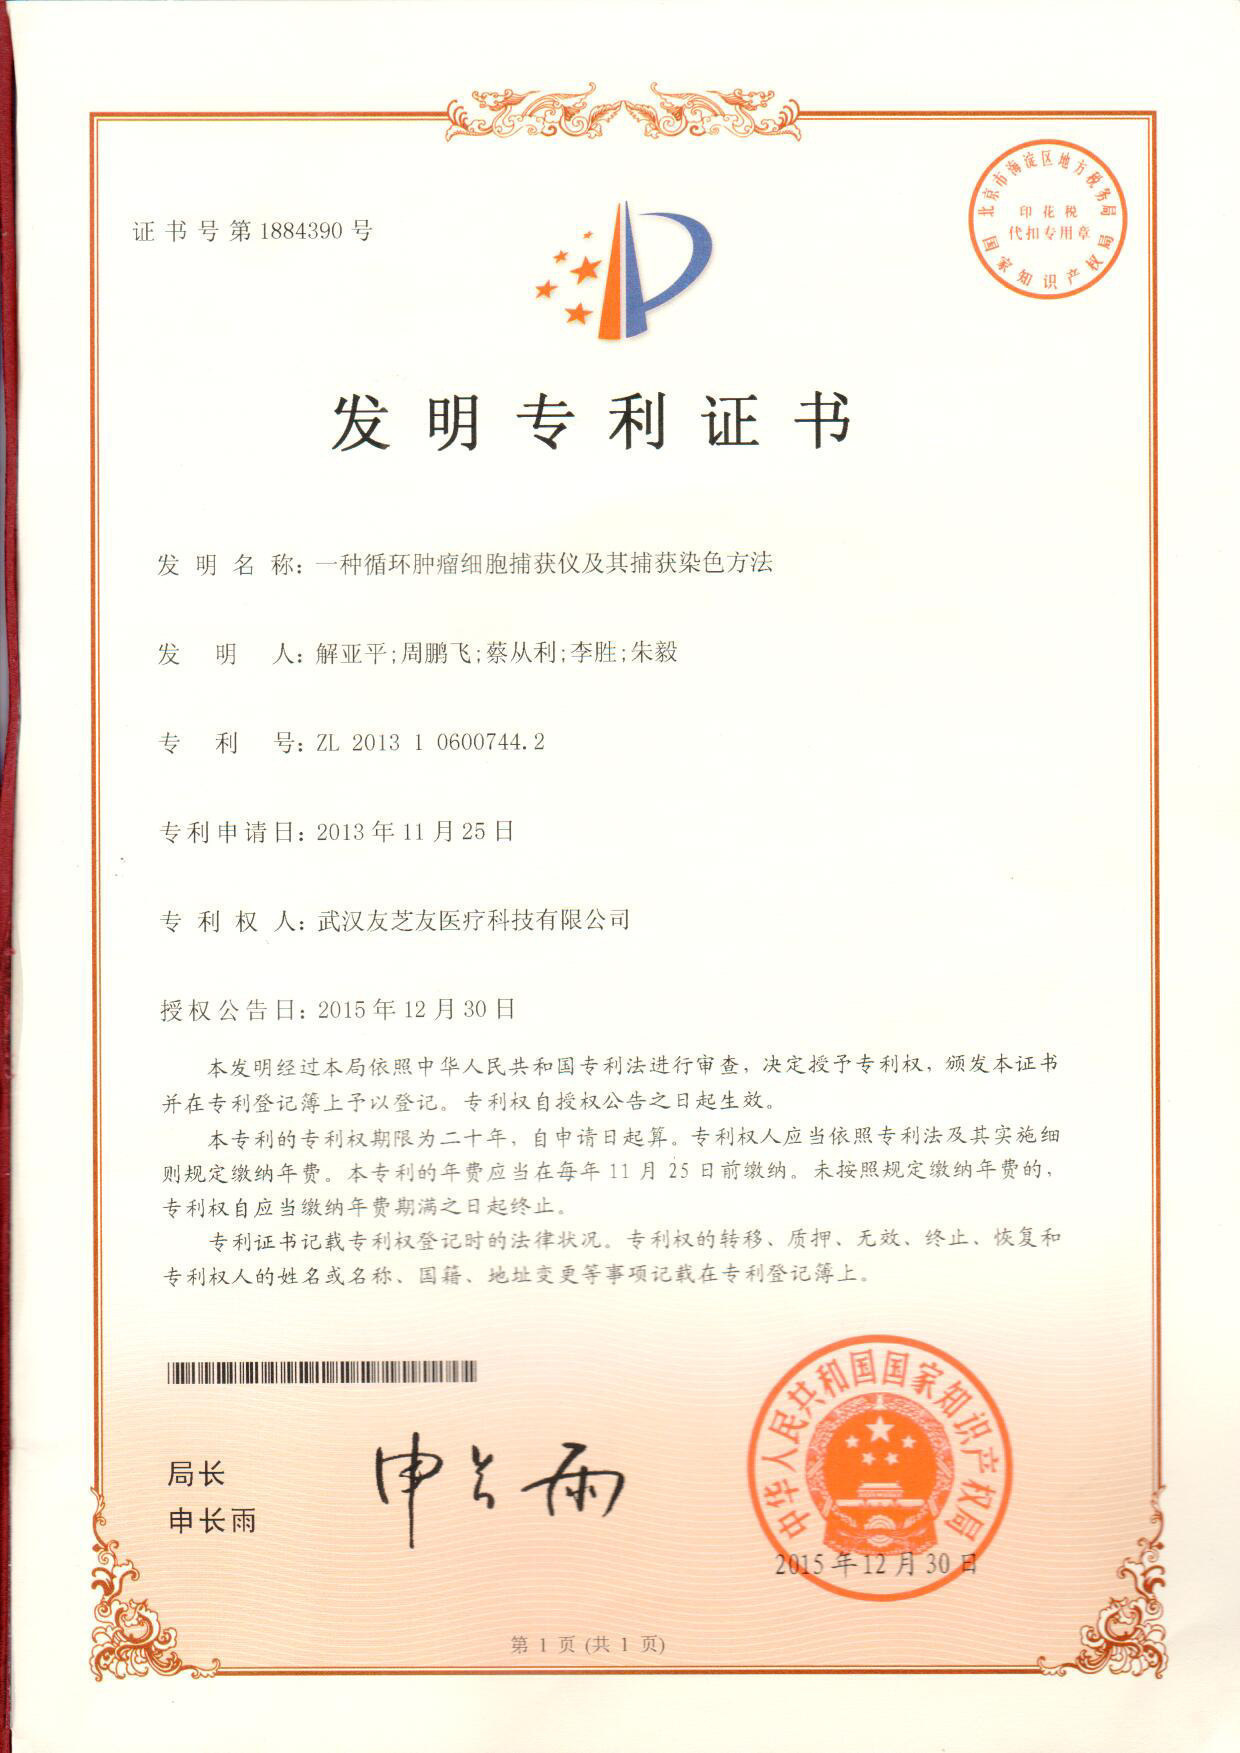 Patent Certificate for CTC invention